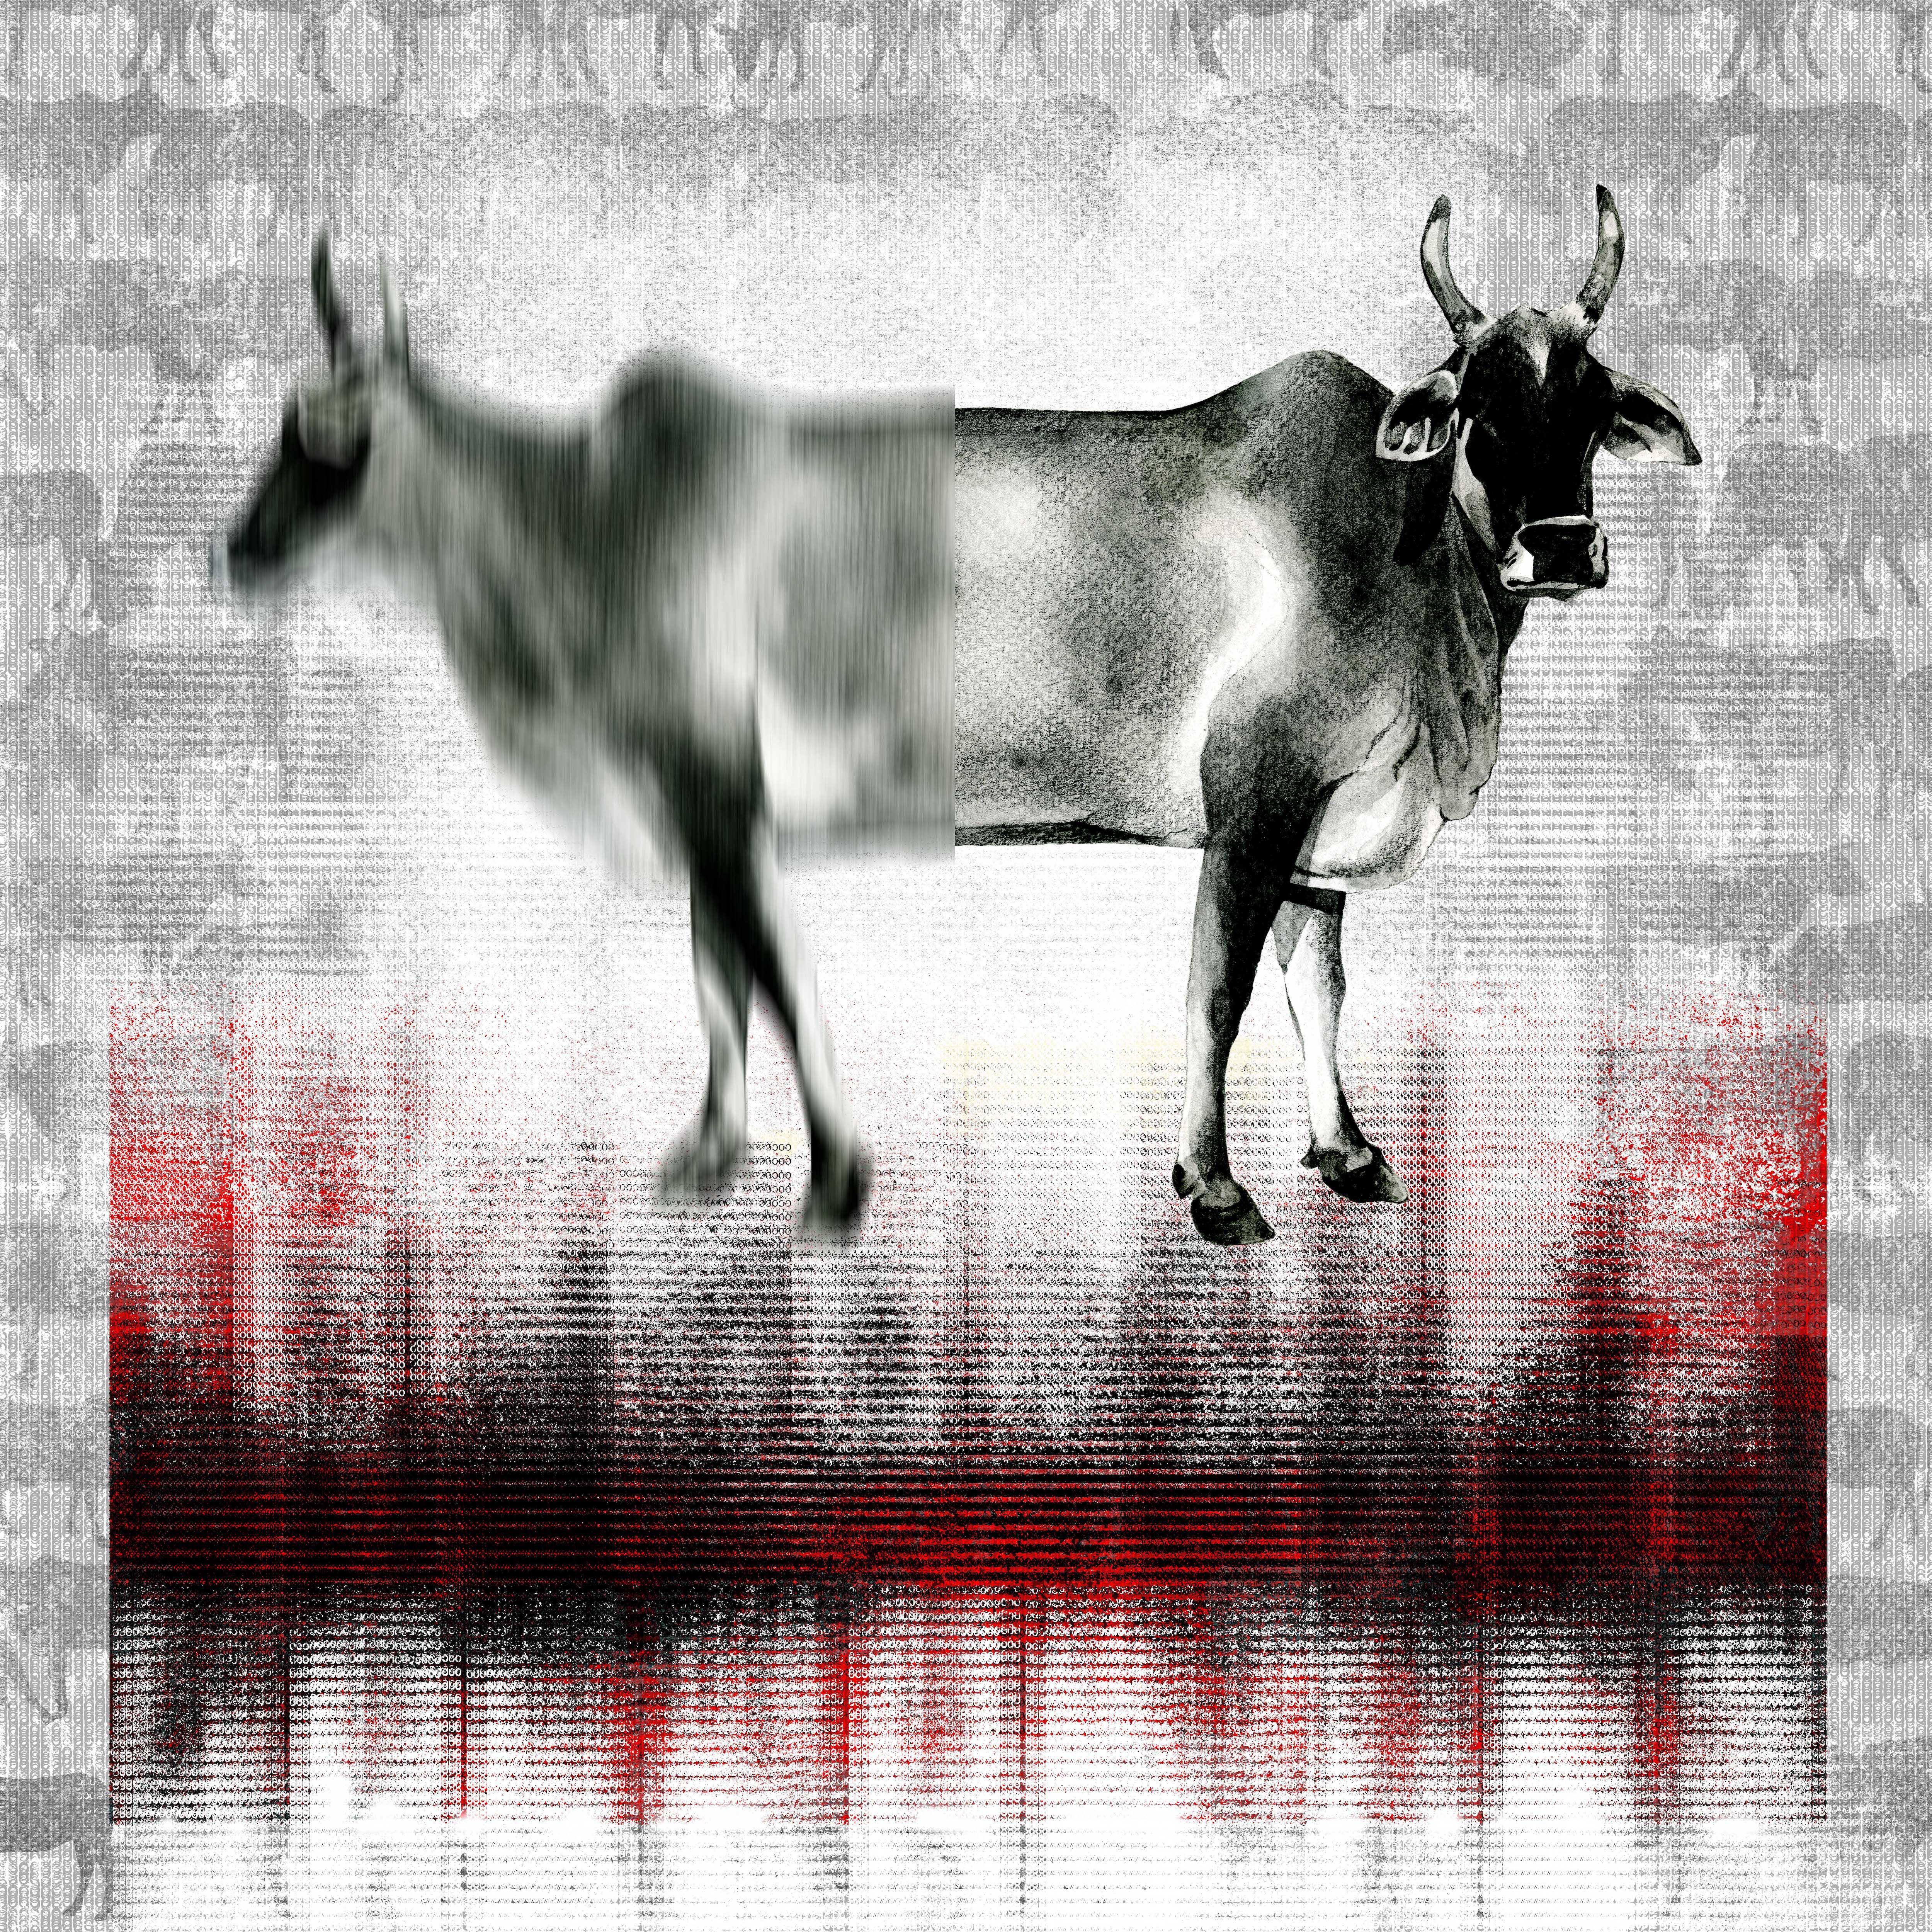 The Holy Cow - Contemporary Digital Print on Paper Black + Red + Grey + White